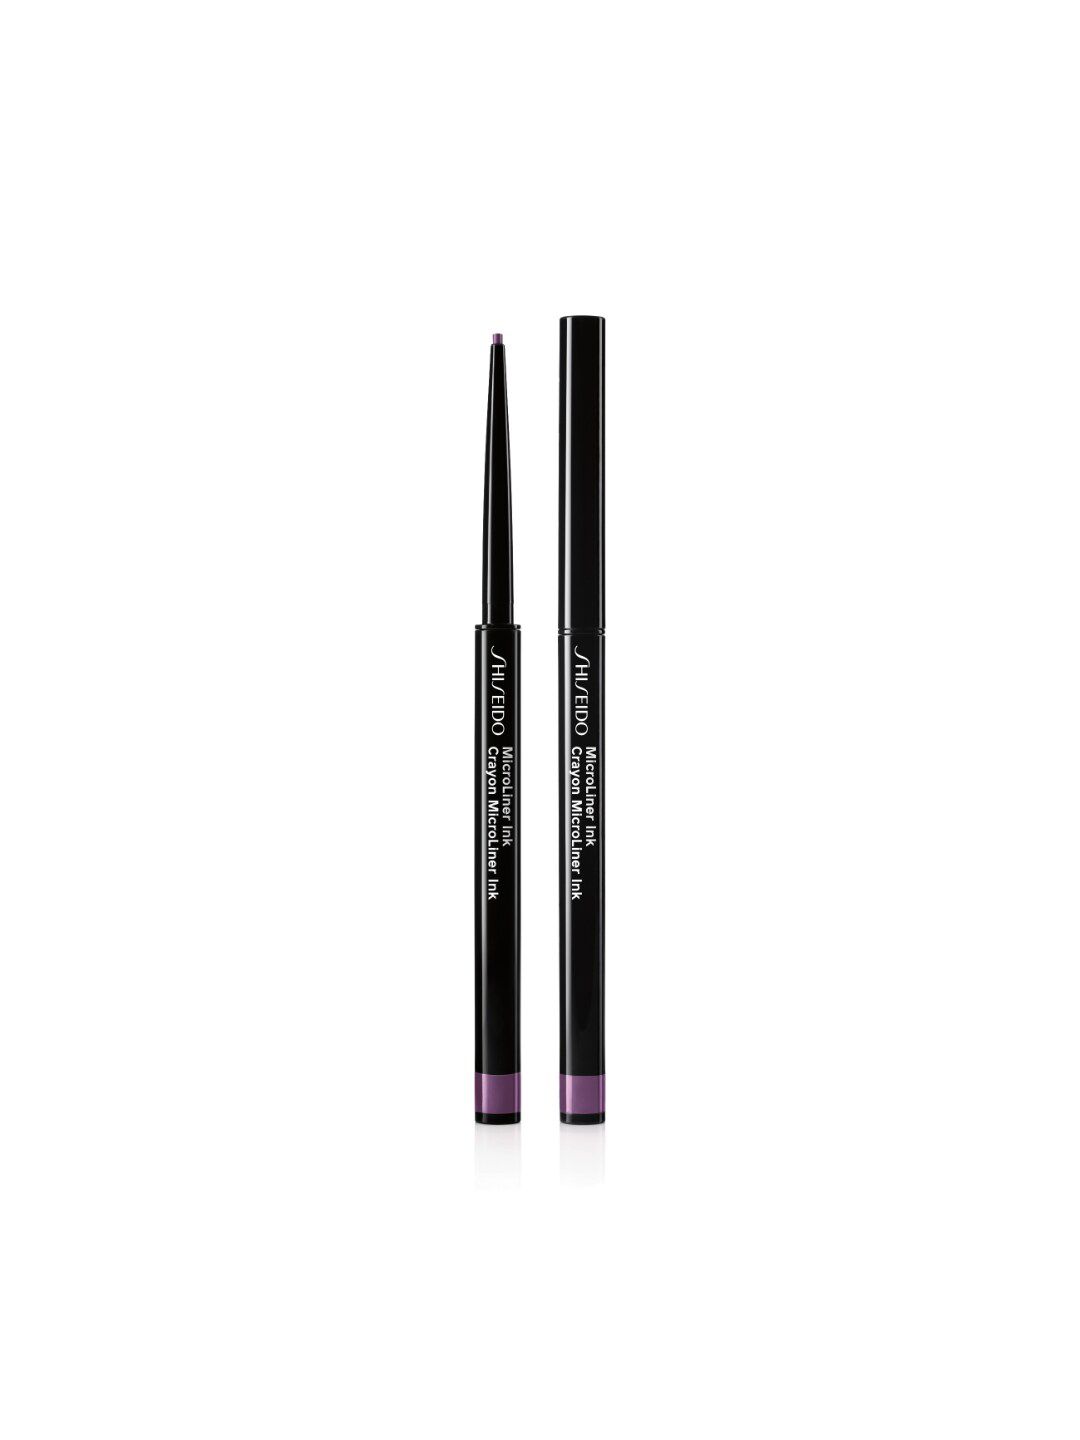 SHISEIDO Crayon MicroLiner Ink - Violet 09 Price in India